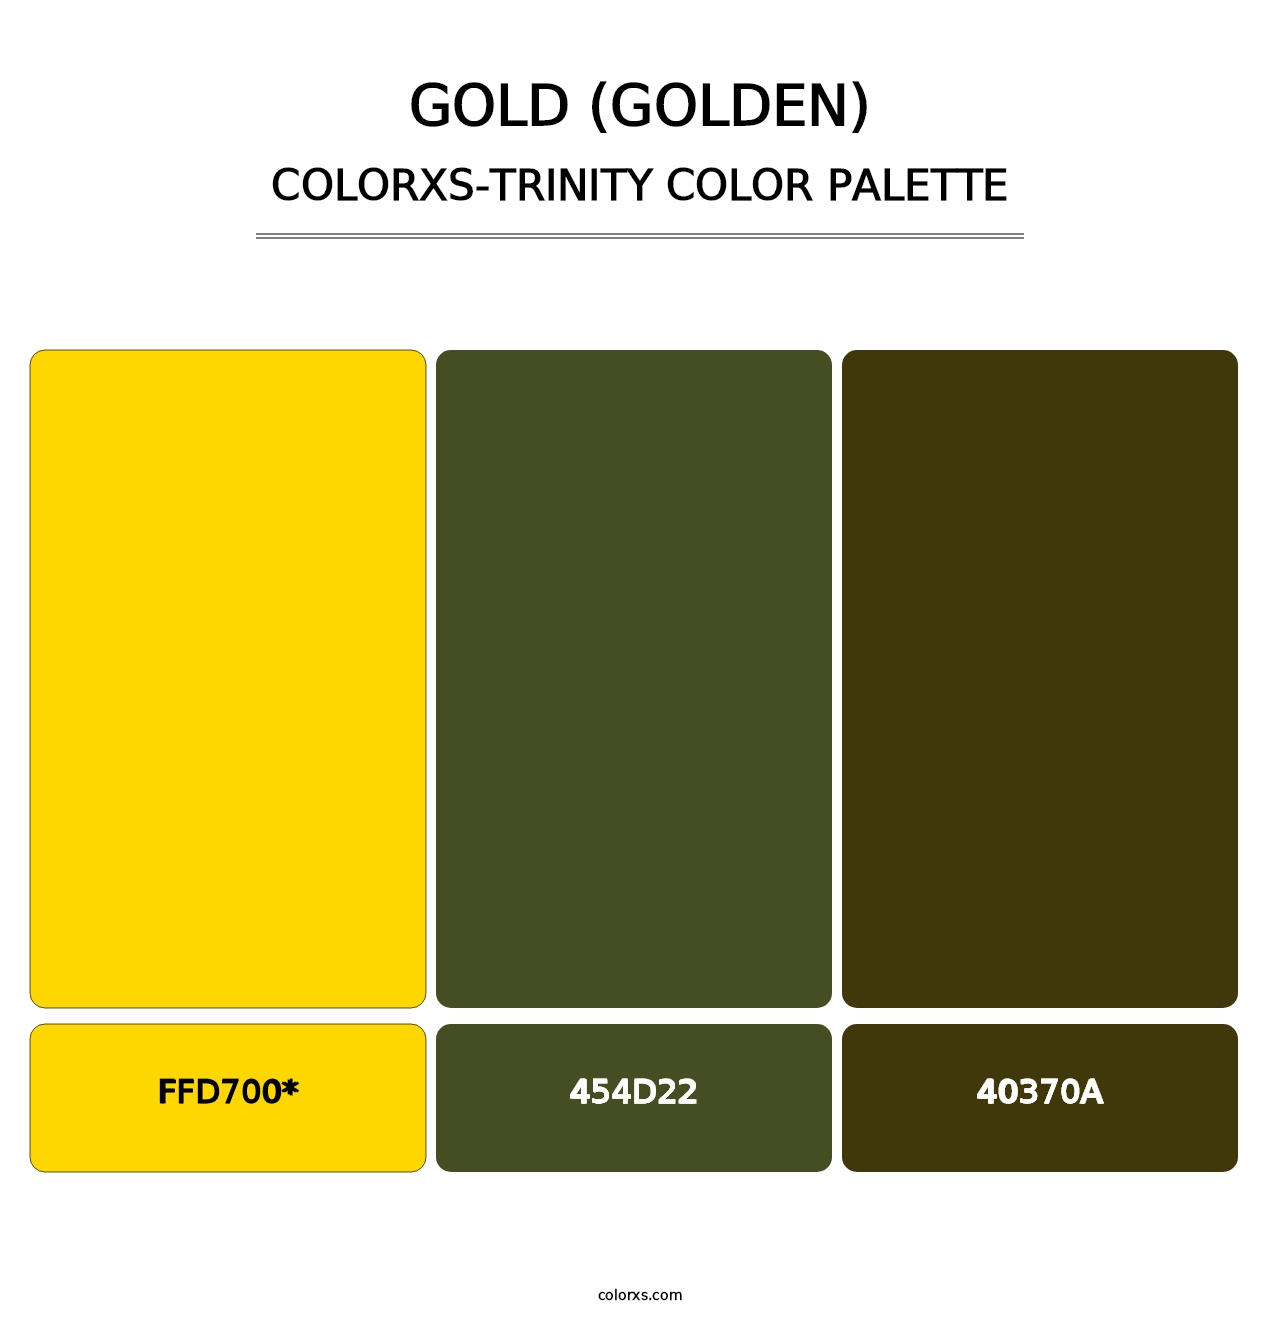 Gold (Golden) - Colorxs Trinity Palette